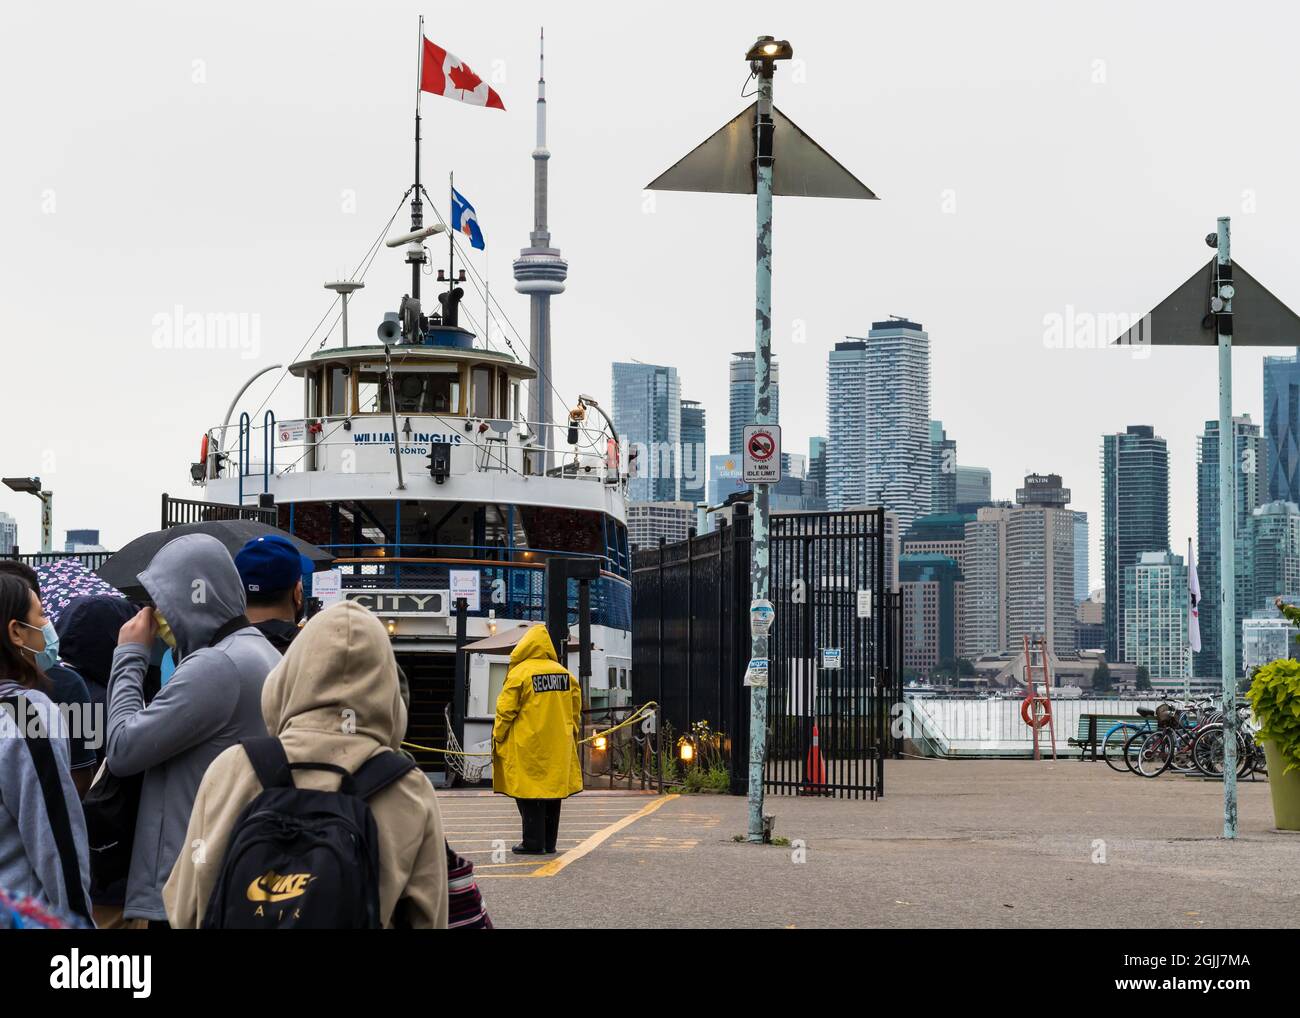 Toronto, Ontario, Canada - July 31 2021: Selective rear-view focus on woman security guard in yellow jacket facing a ferry on dock of Toronto Islands. Stock Photo